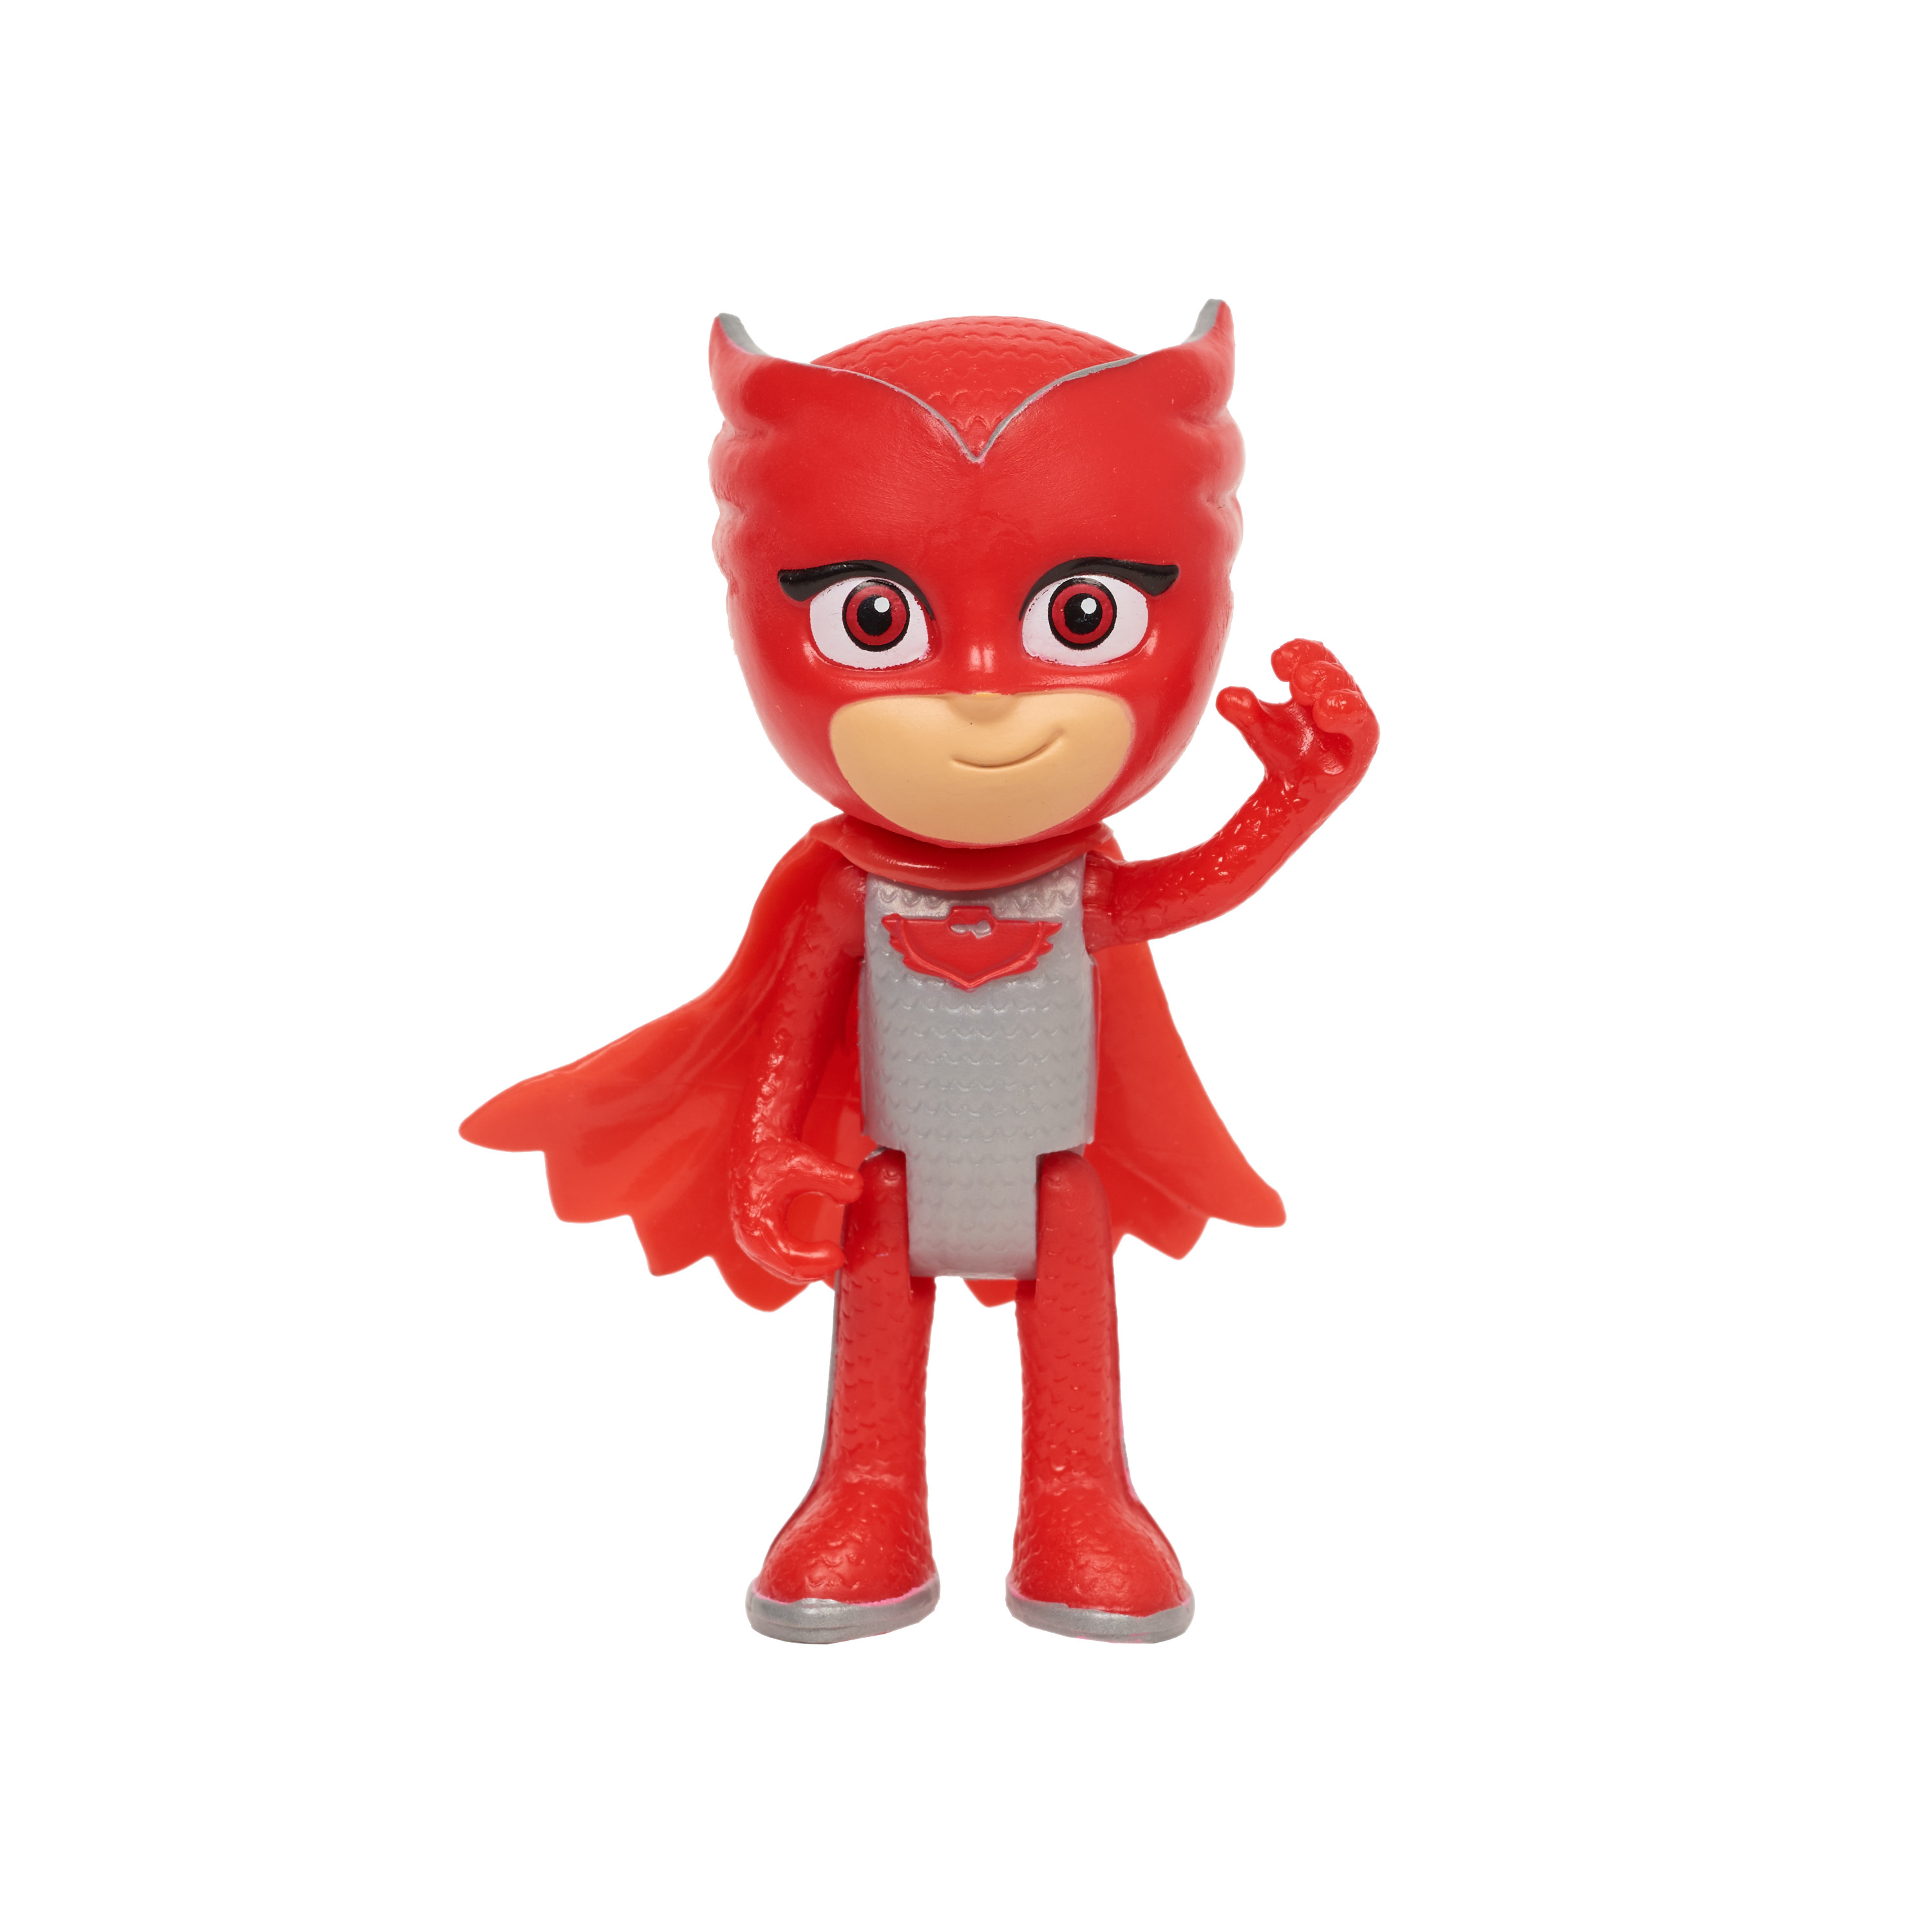 PJ Masks Articulated Figures 3-Pack,  Kids Toys for Ages 3 Up, Gifts and Presents - image 3 of 3